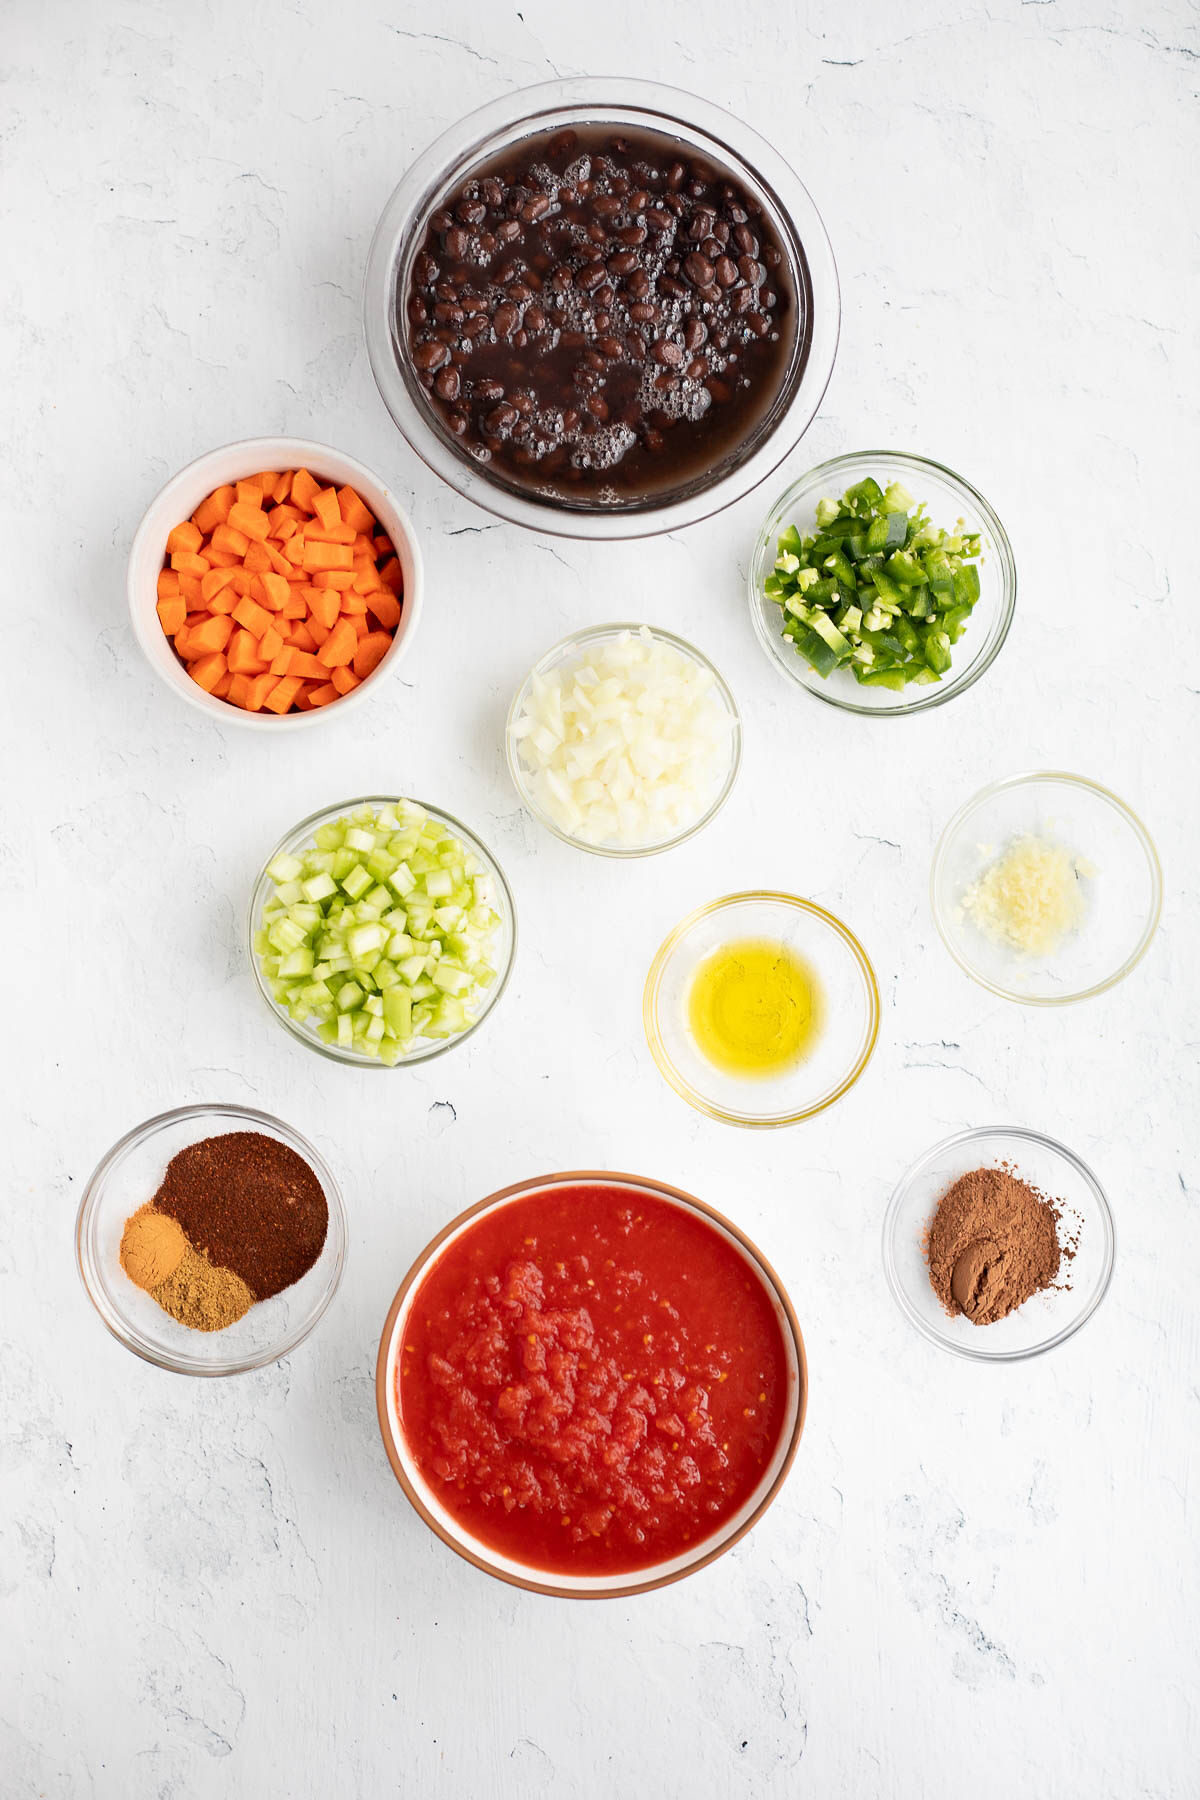 Ingredients for Black Bean Chili with Chocolate in various sized glass bowls, top view.